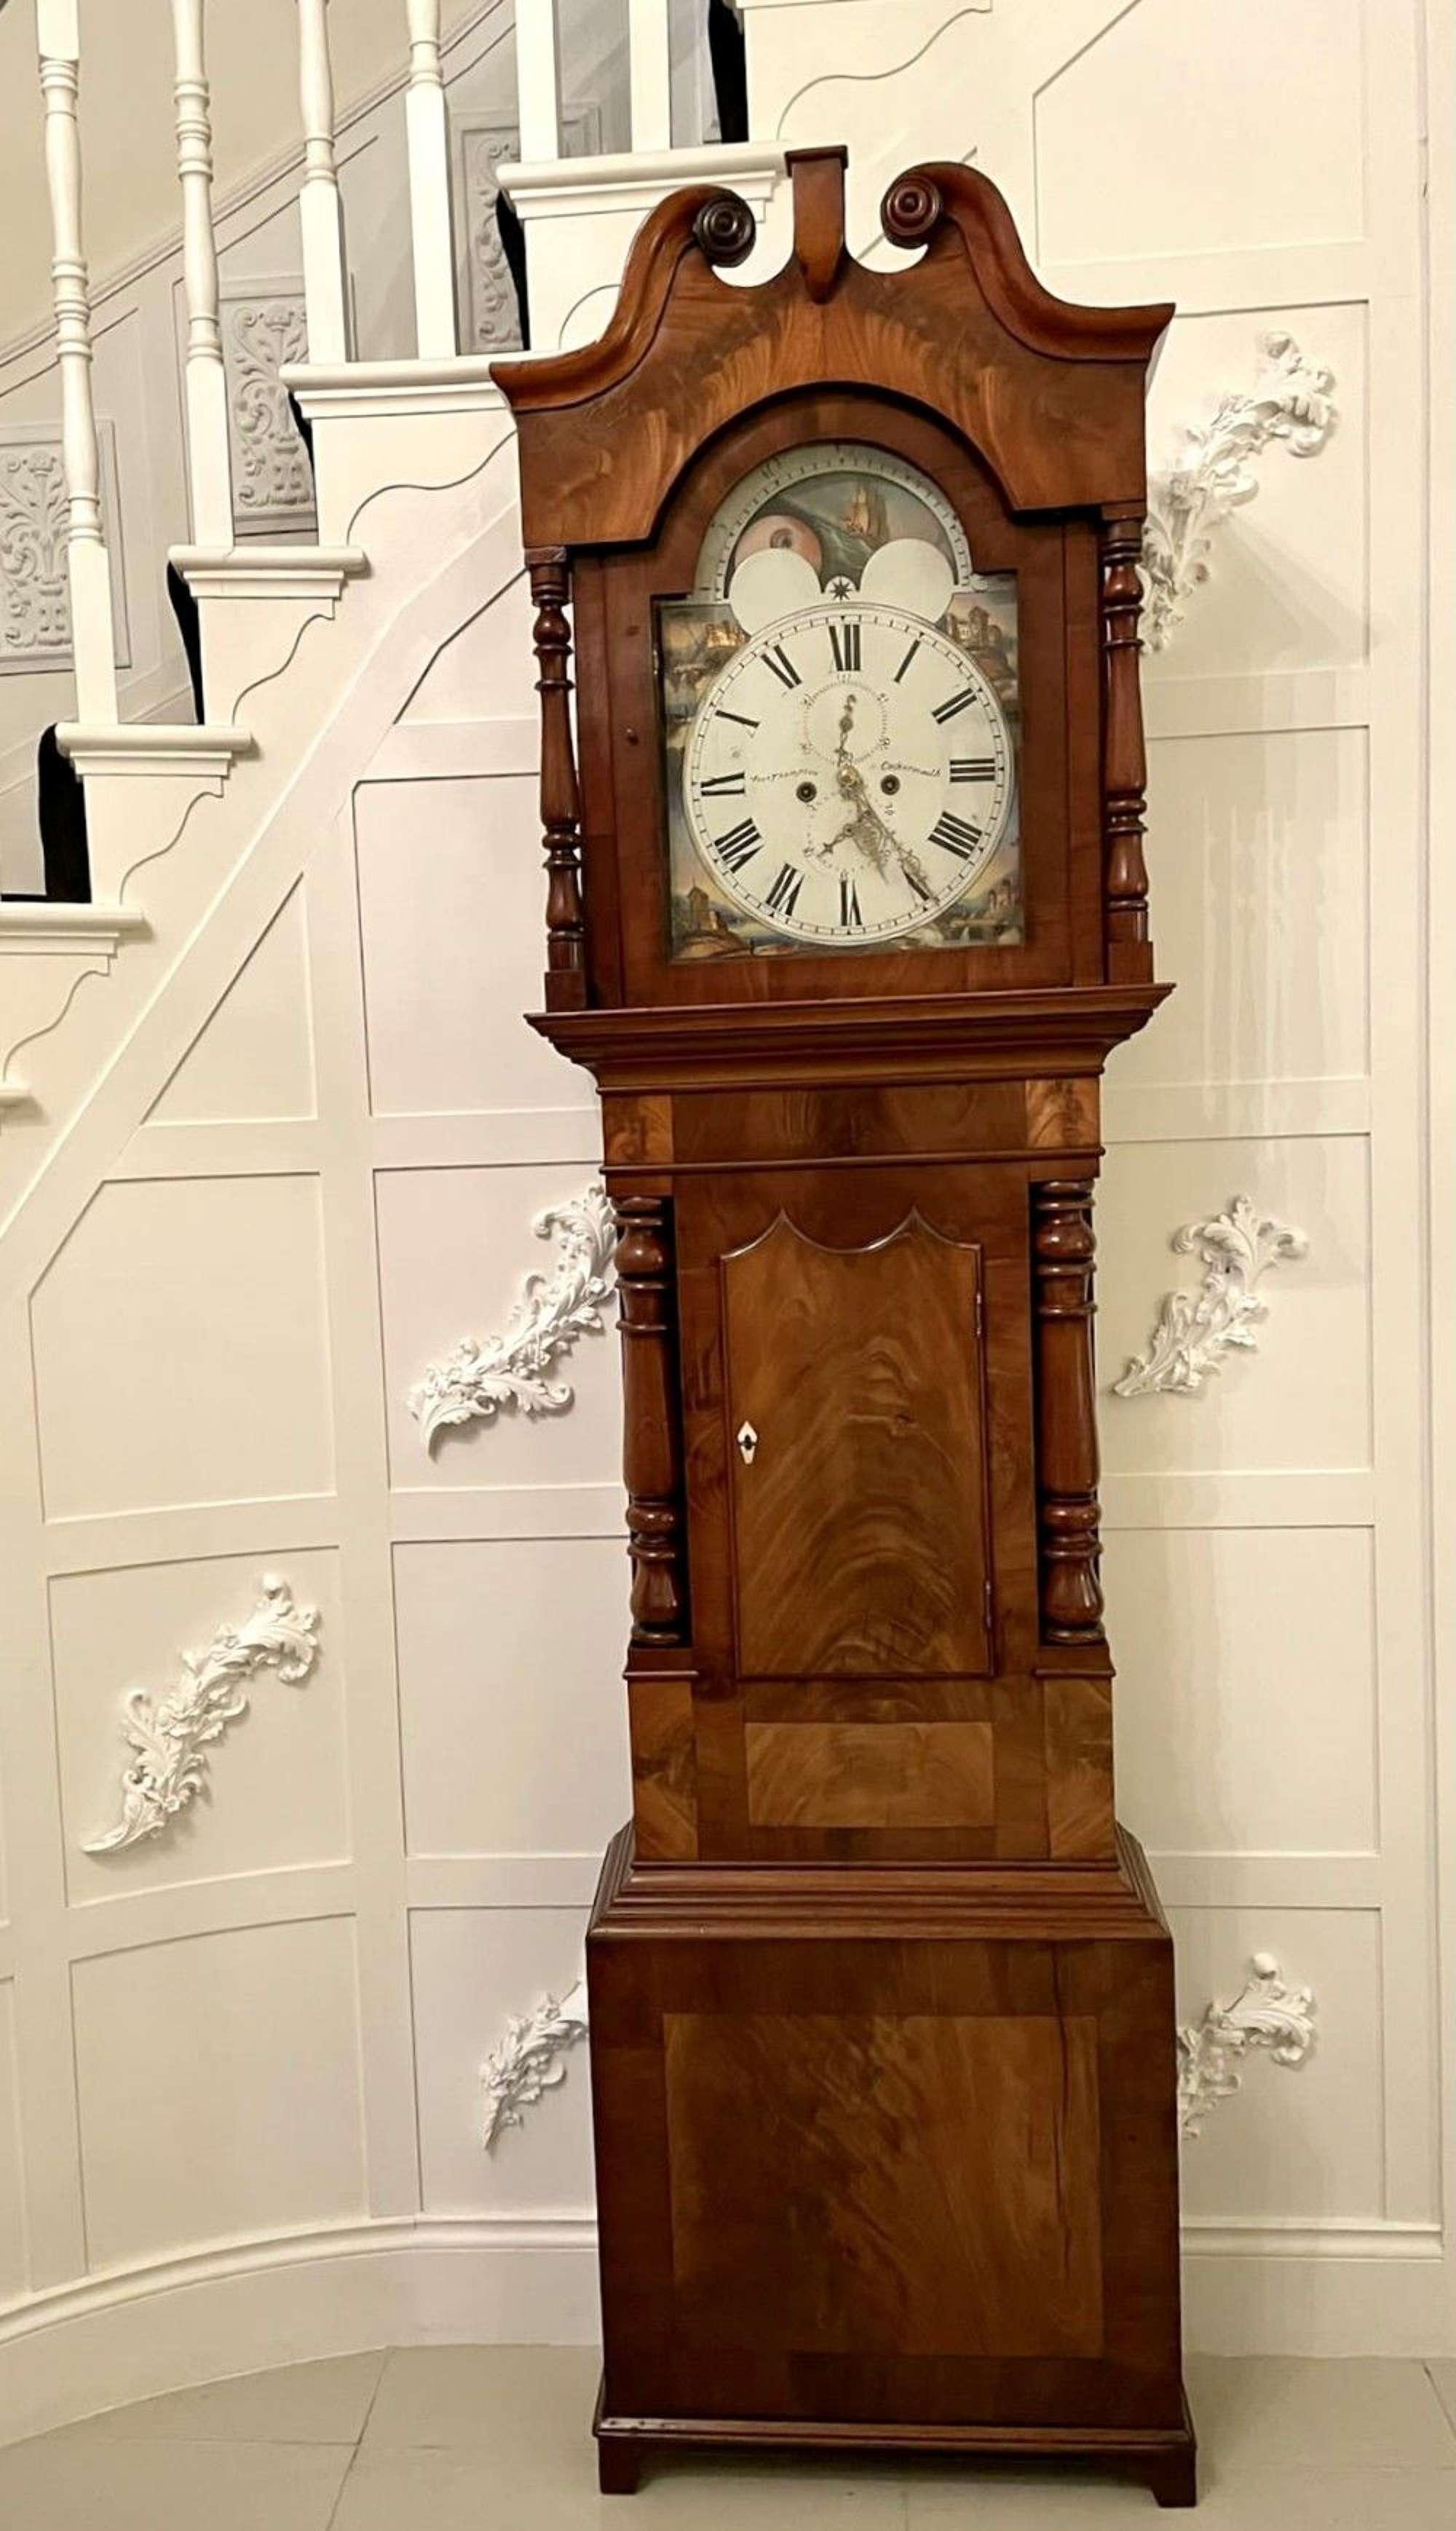 Outstanding Quality Antique Victorian Figured Mahogany Grandfather Clock With Painted Arched Dial And Moon Roller